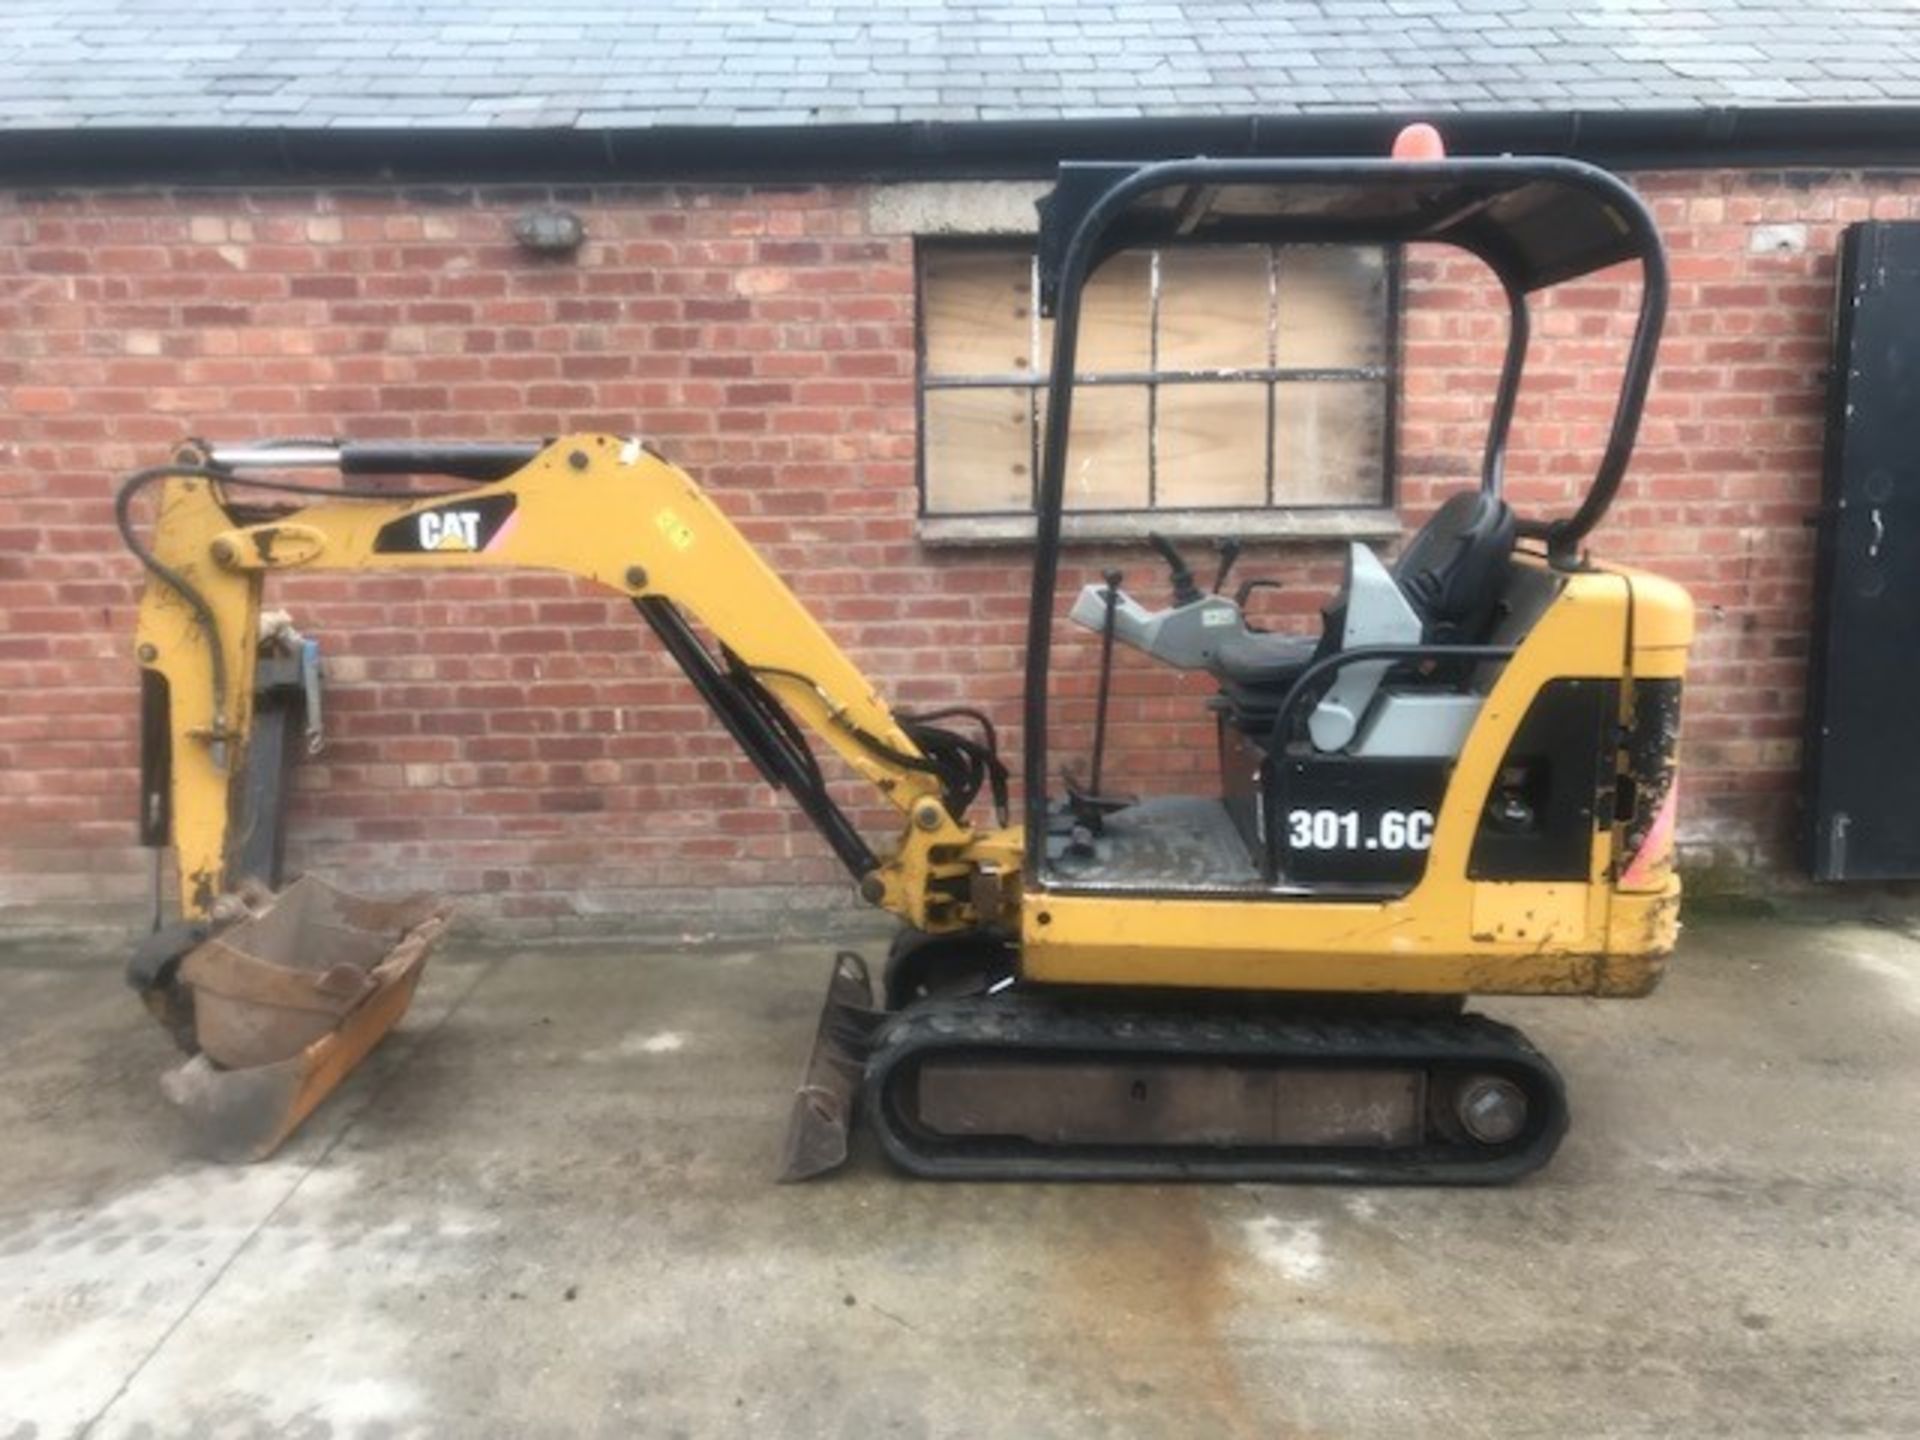 CAT MINI DIGGER 1.6T WITH 3 BUCKETS & QUICK HITCH (2009) - Image 5 of 5